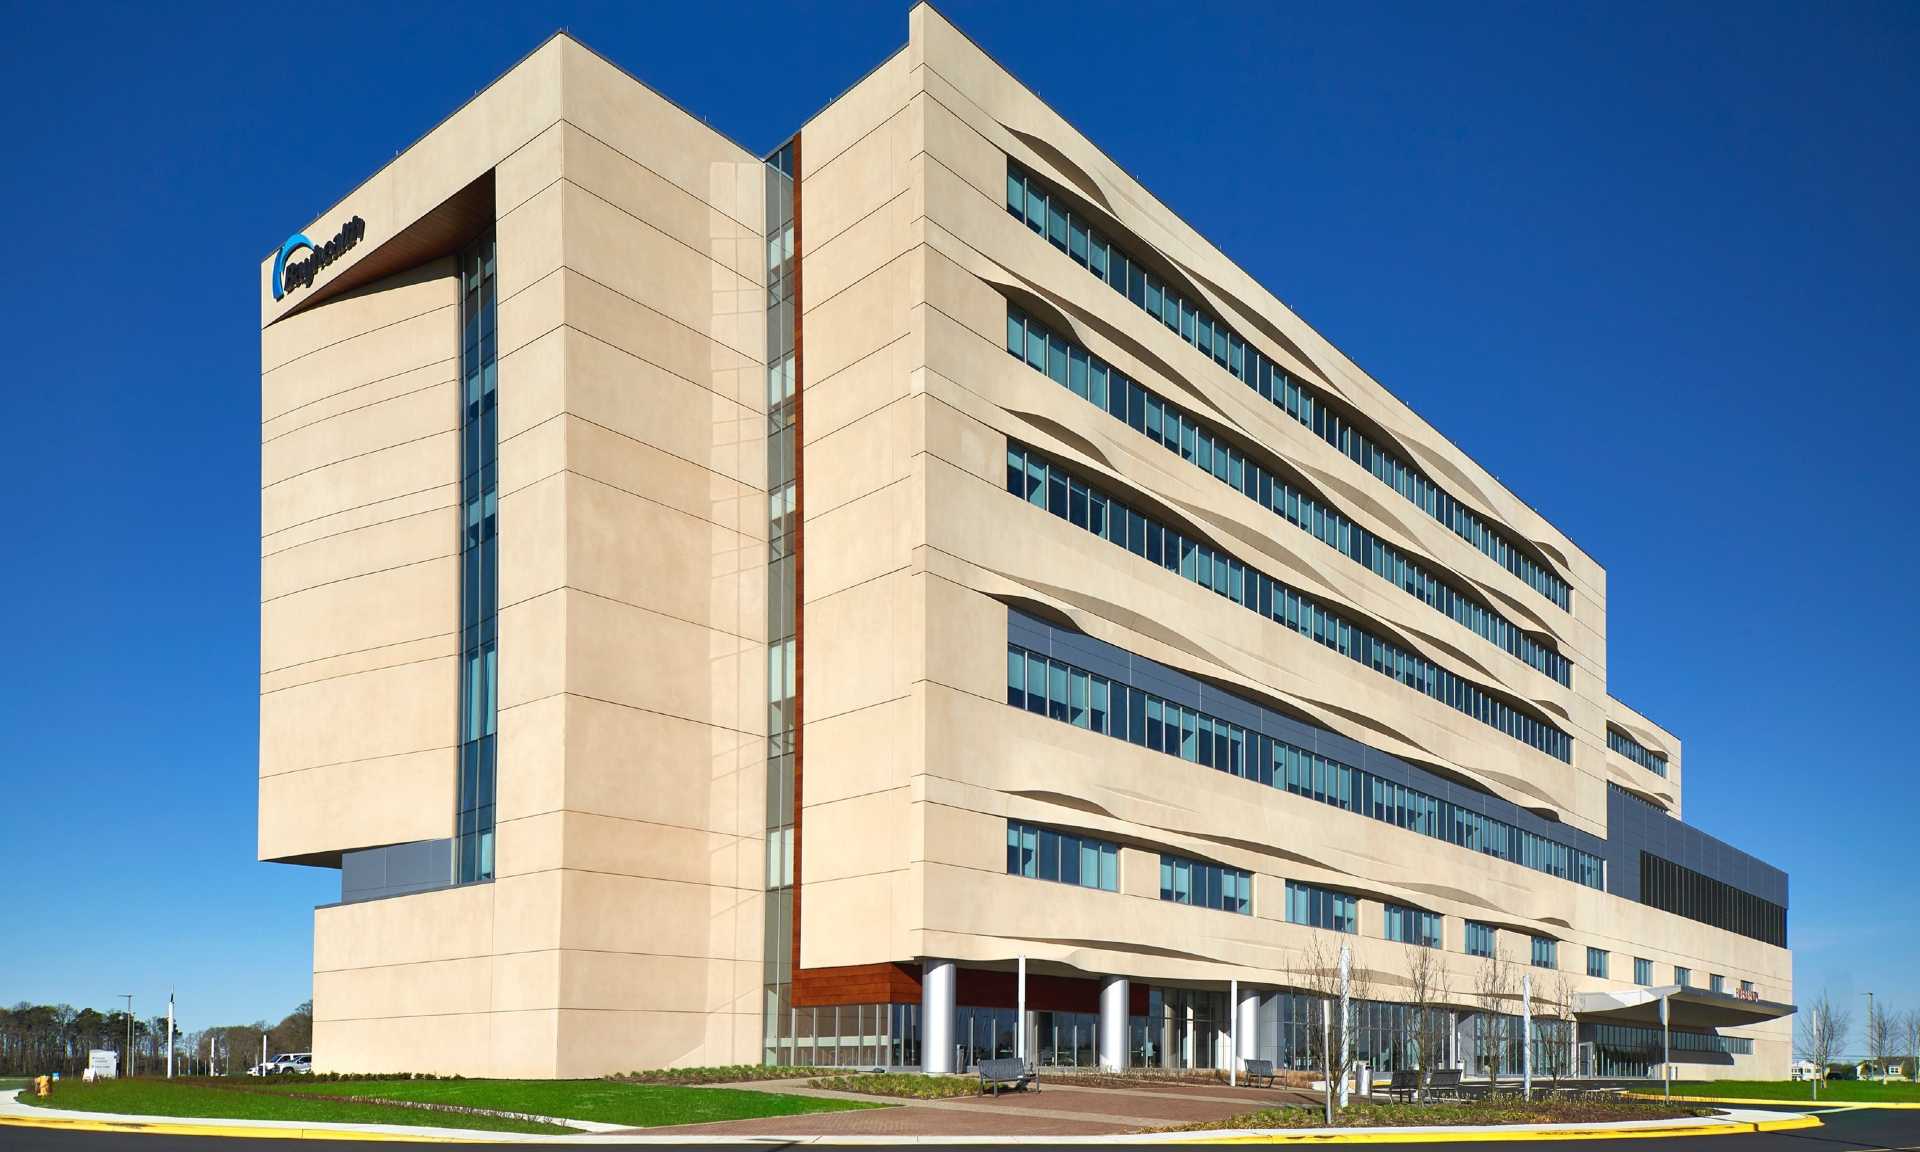 Exterior of Bayhealth Hospital, Sussex Campus against a bright blue sky